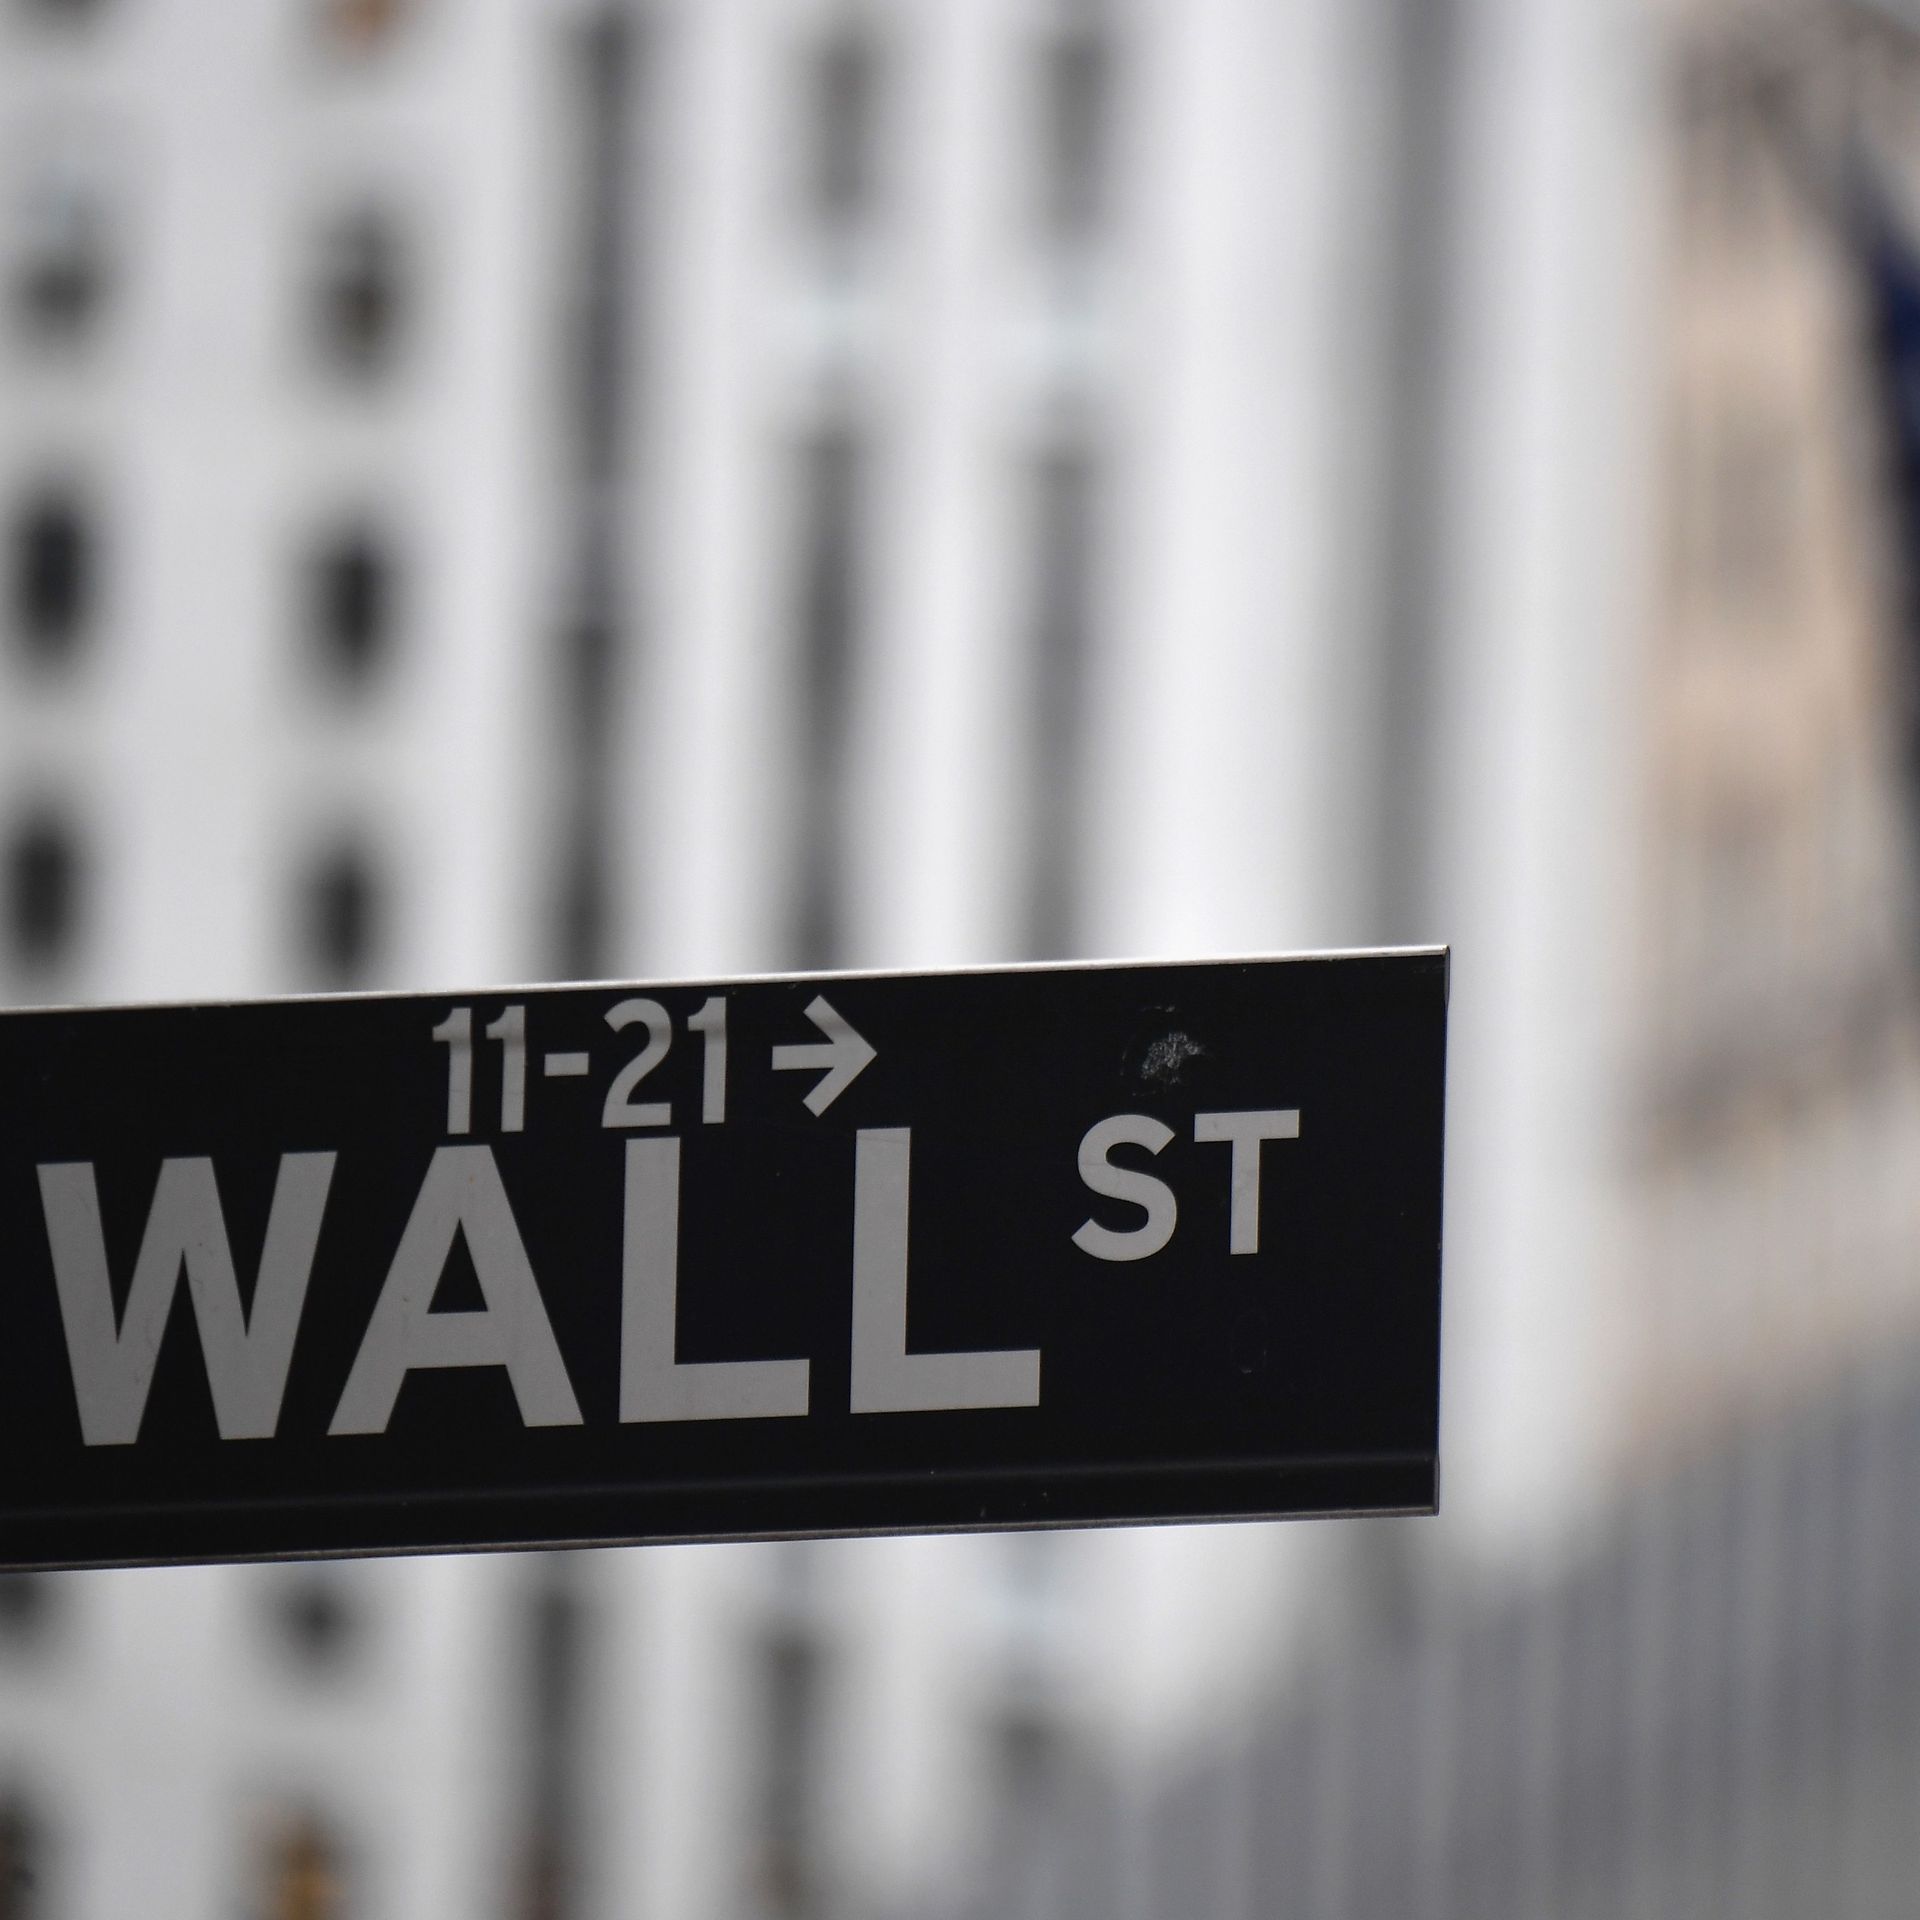 A photo of a Wall Street street sign.